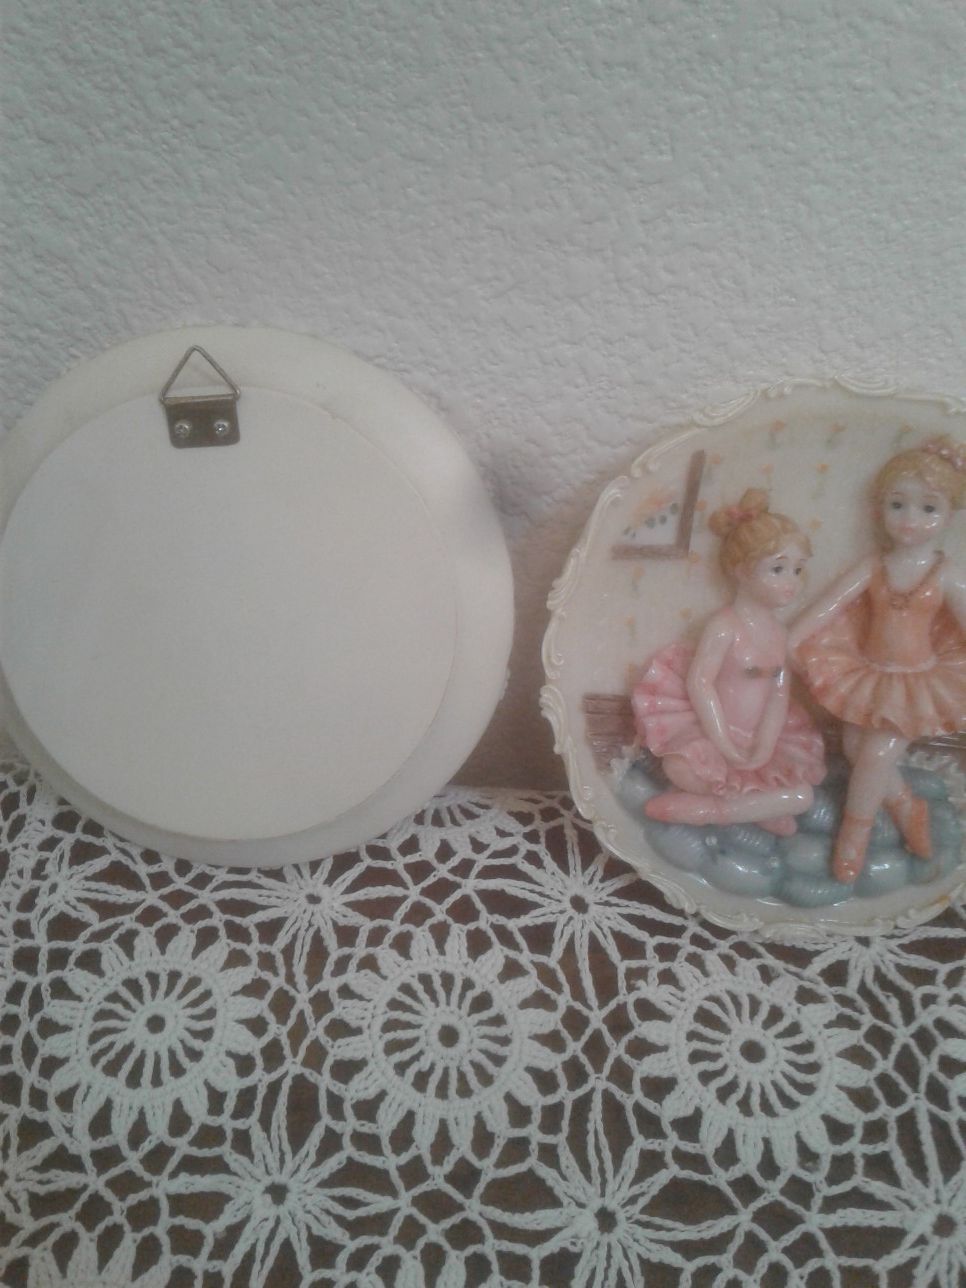 Home decor. $10 for both. Made out of ceramic